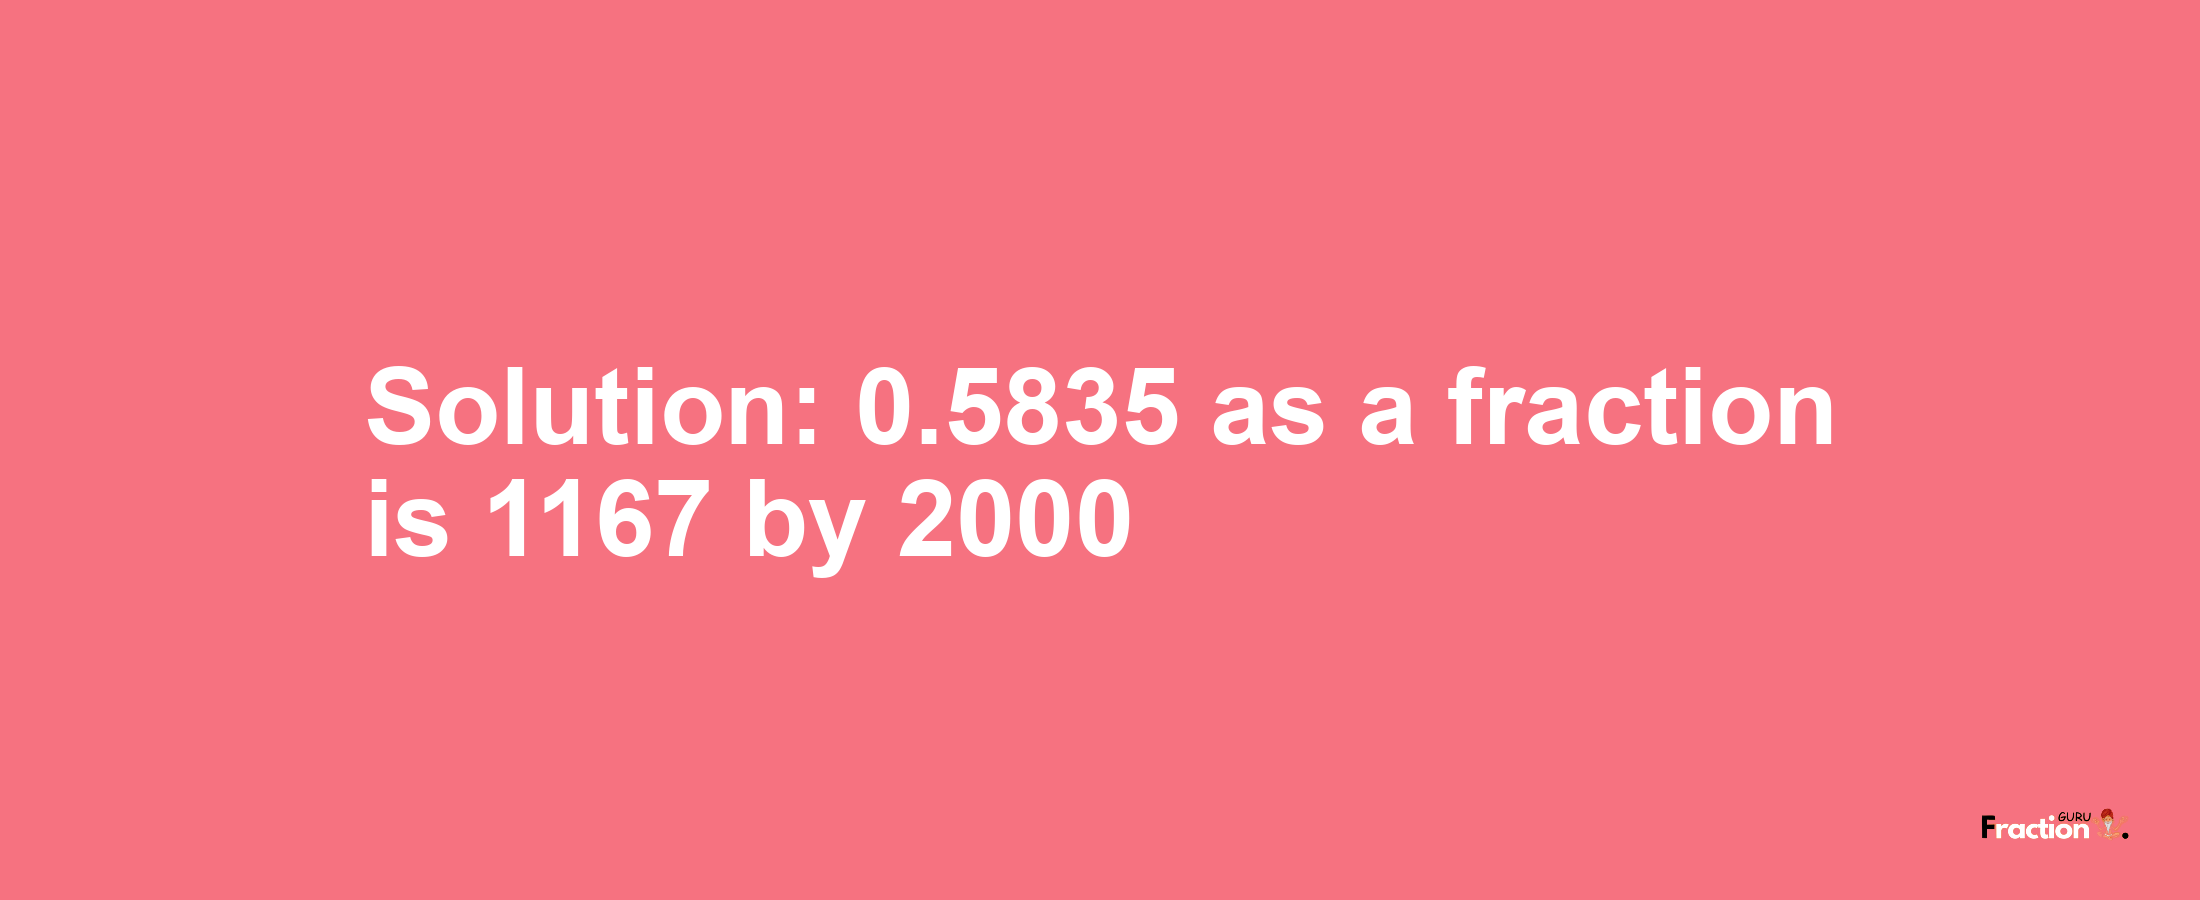 Solution:0.5835 as a fraction is 1167/2000